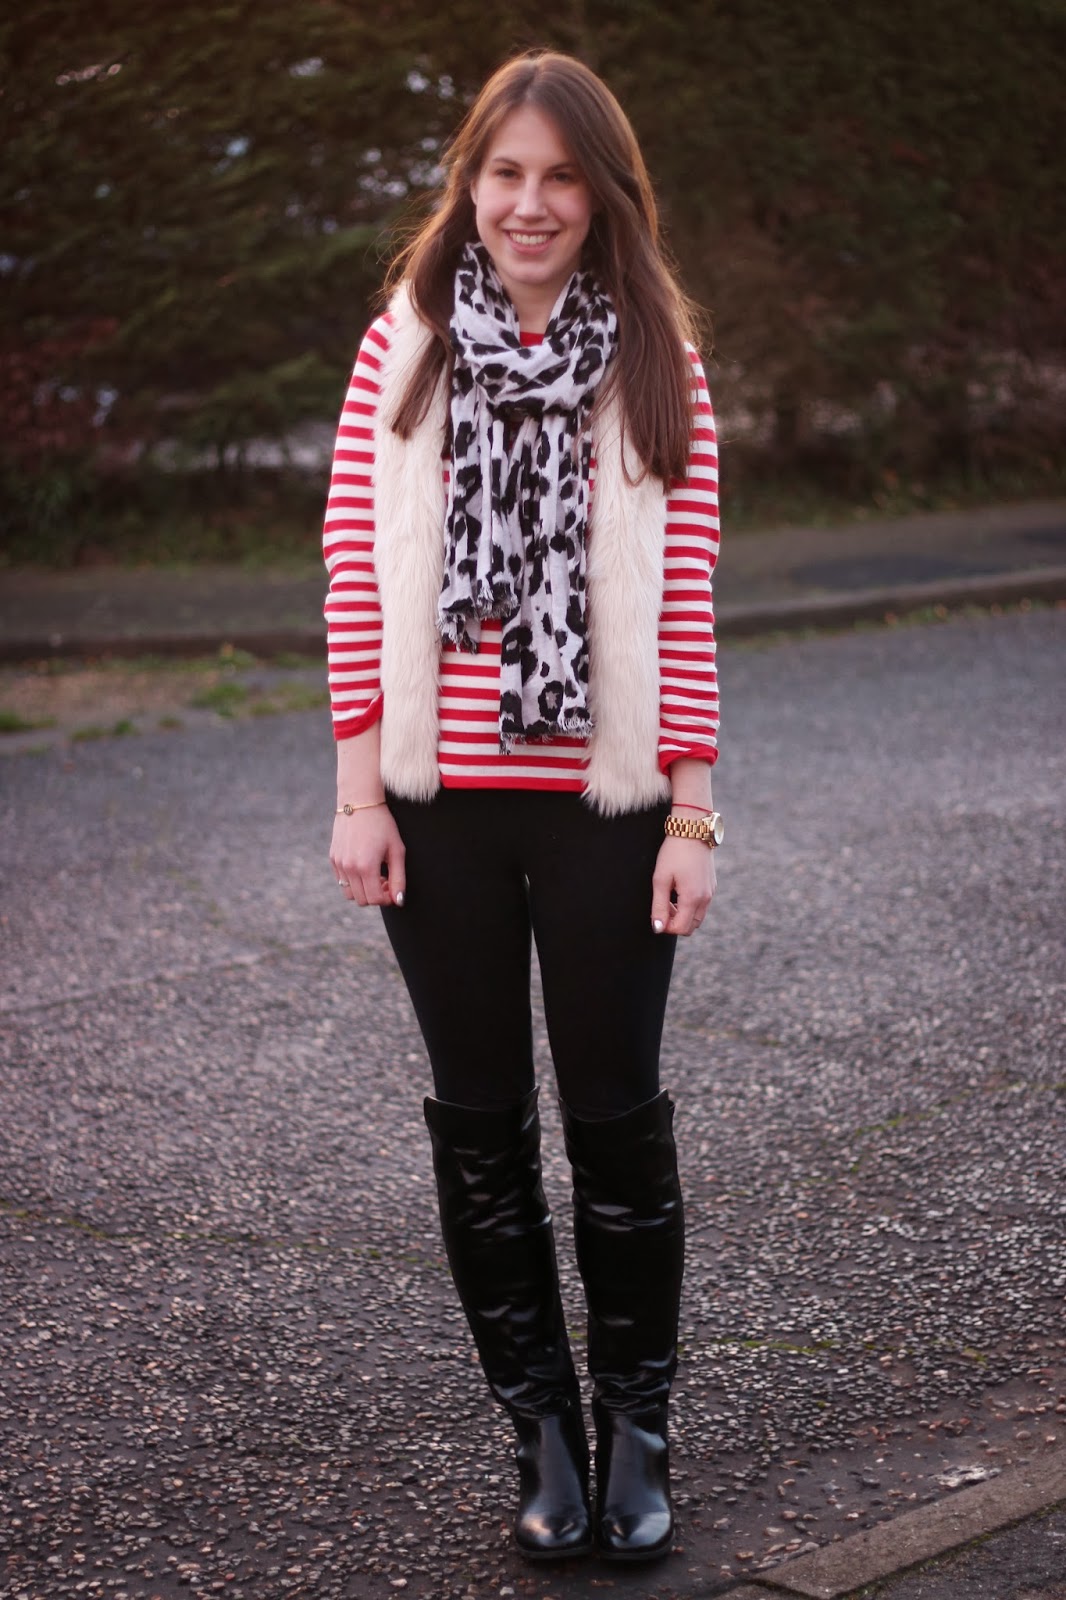 Five Minute Style: Candy Cane Stripes